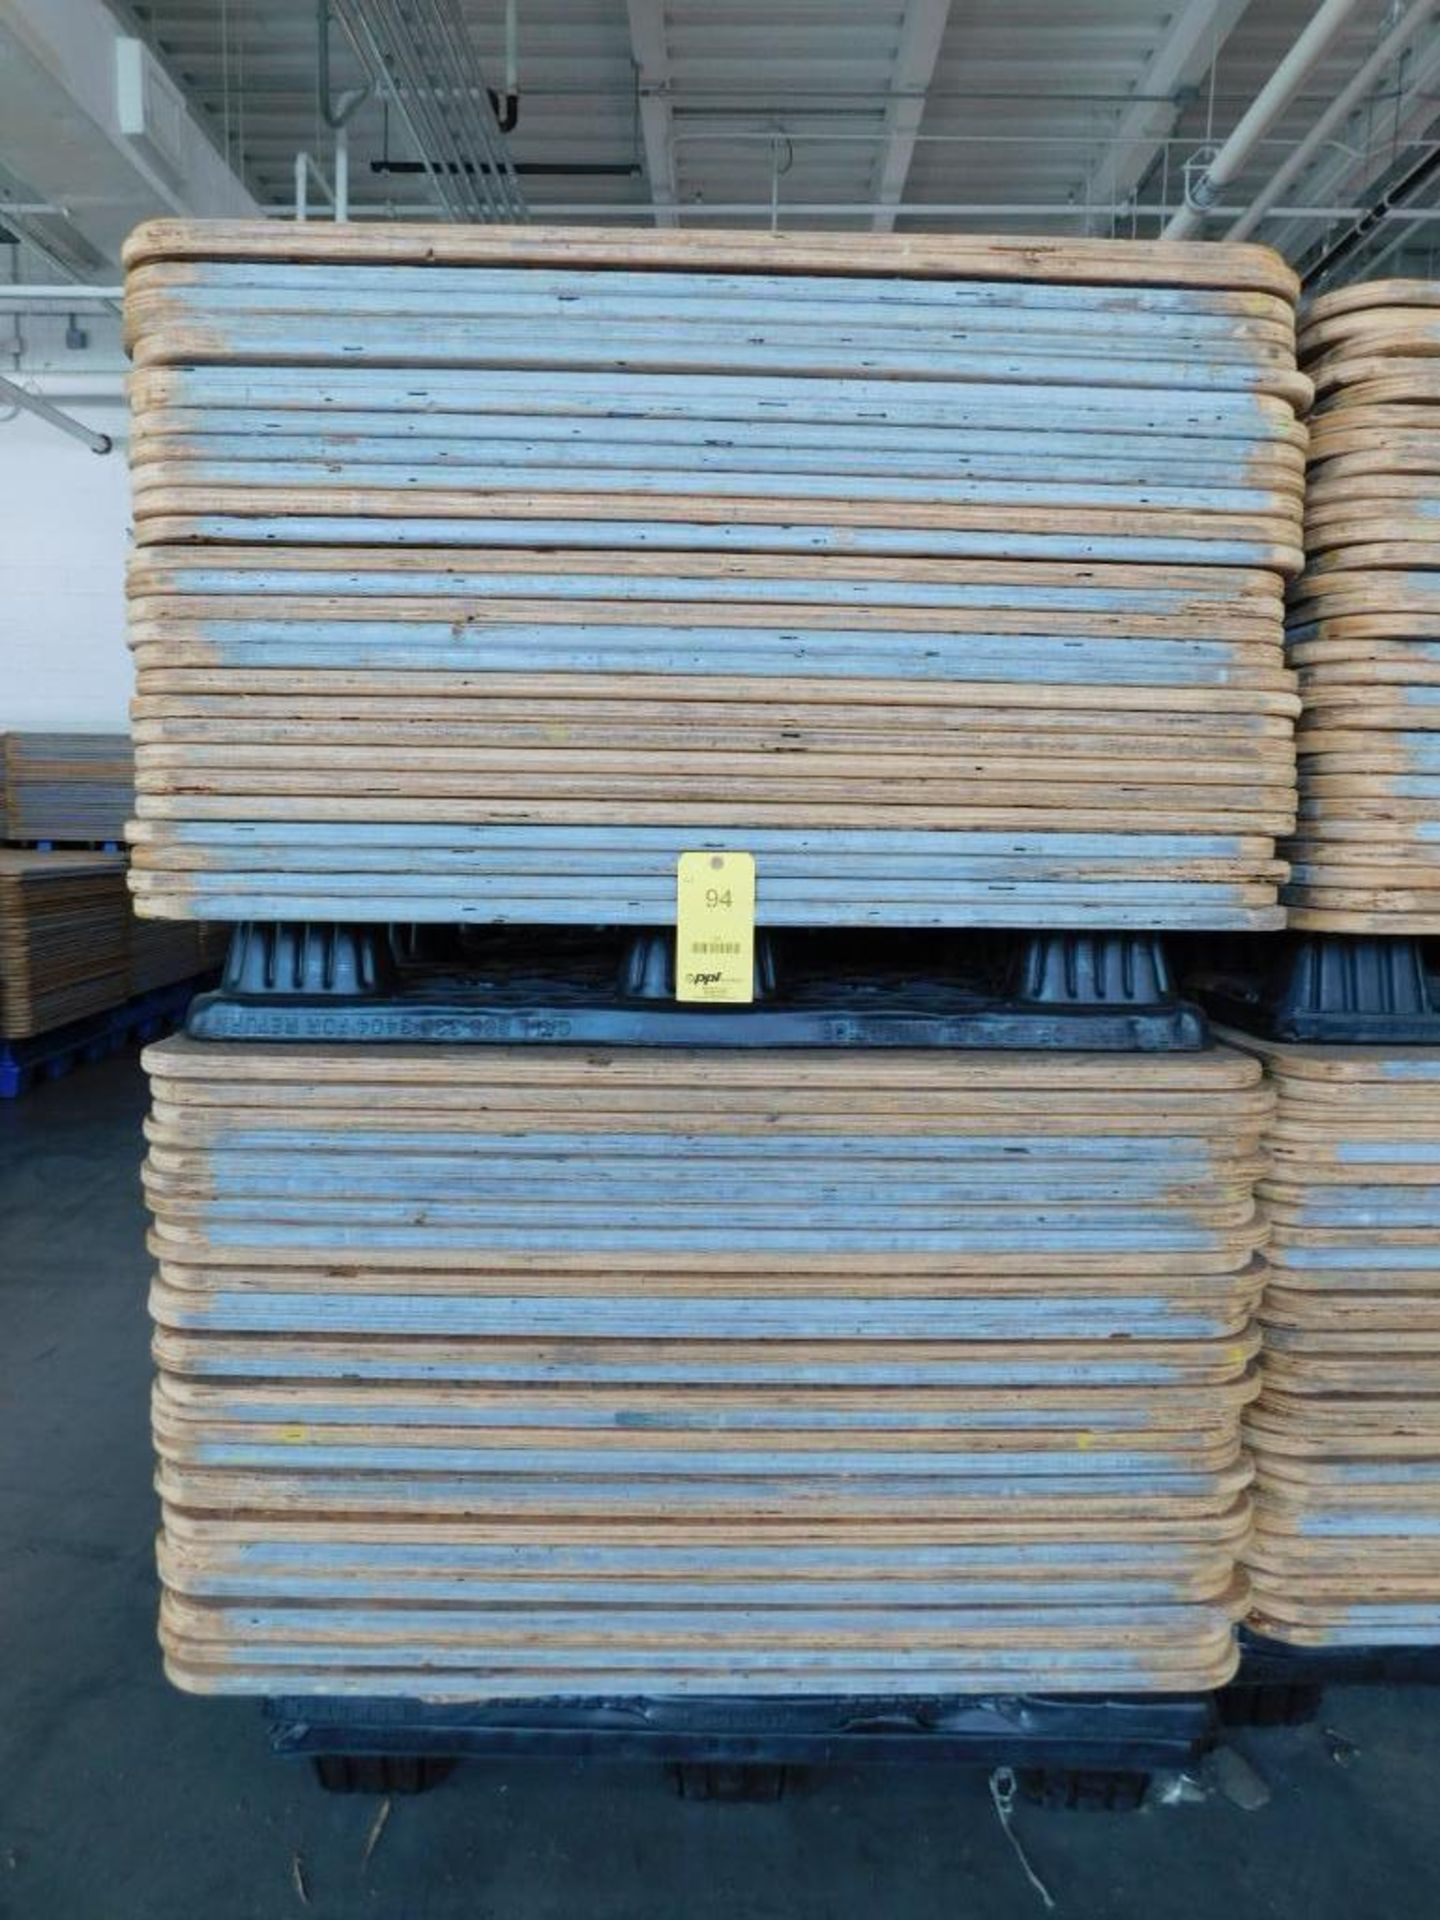 LOT: Large Quantity of 50" x 50" Wood Paper Roll Pallets on (12) Plastic Pallets (LOCATION: IN MAIL